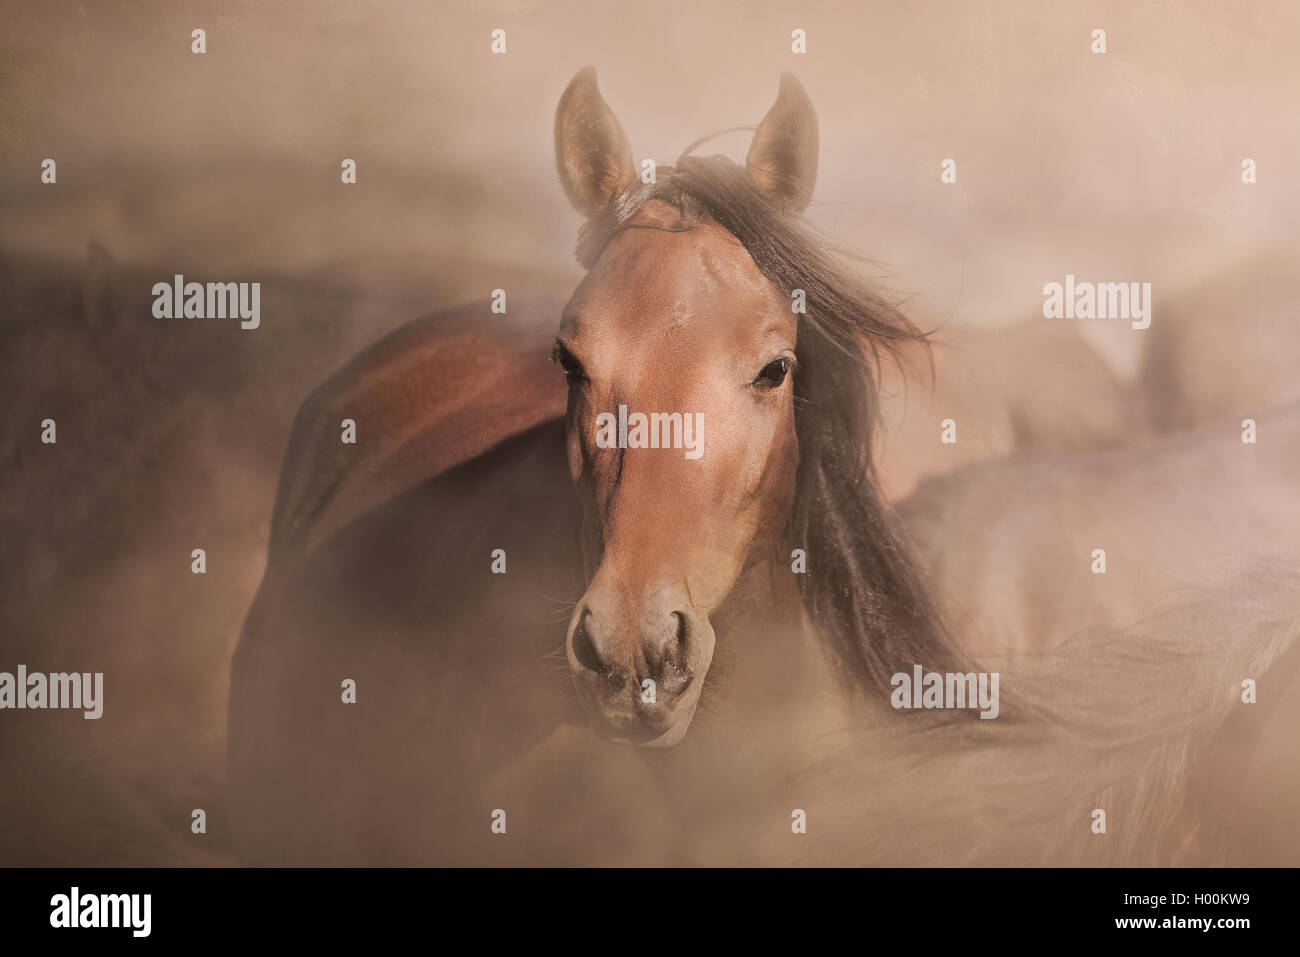 Brown Horse Portrait in Dust Stock Photo